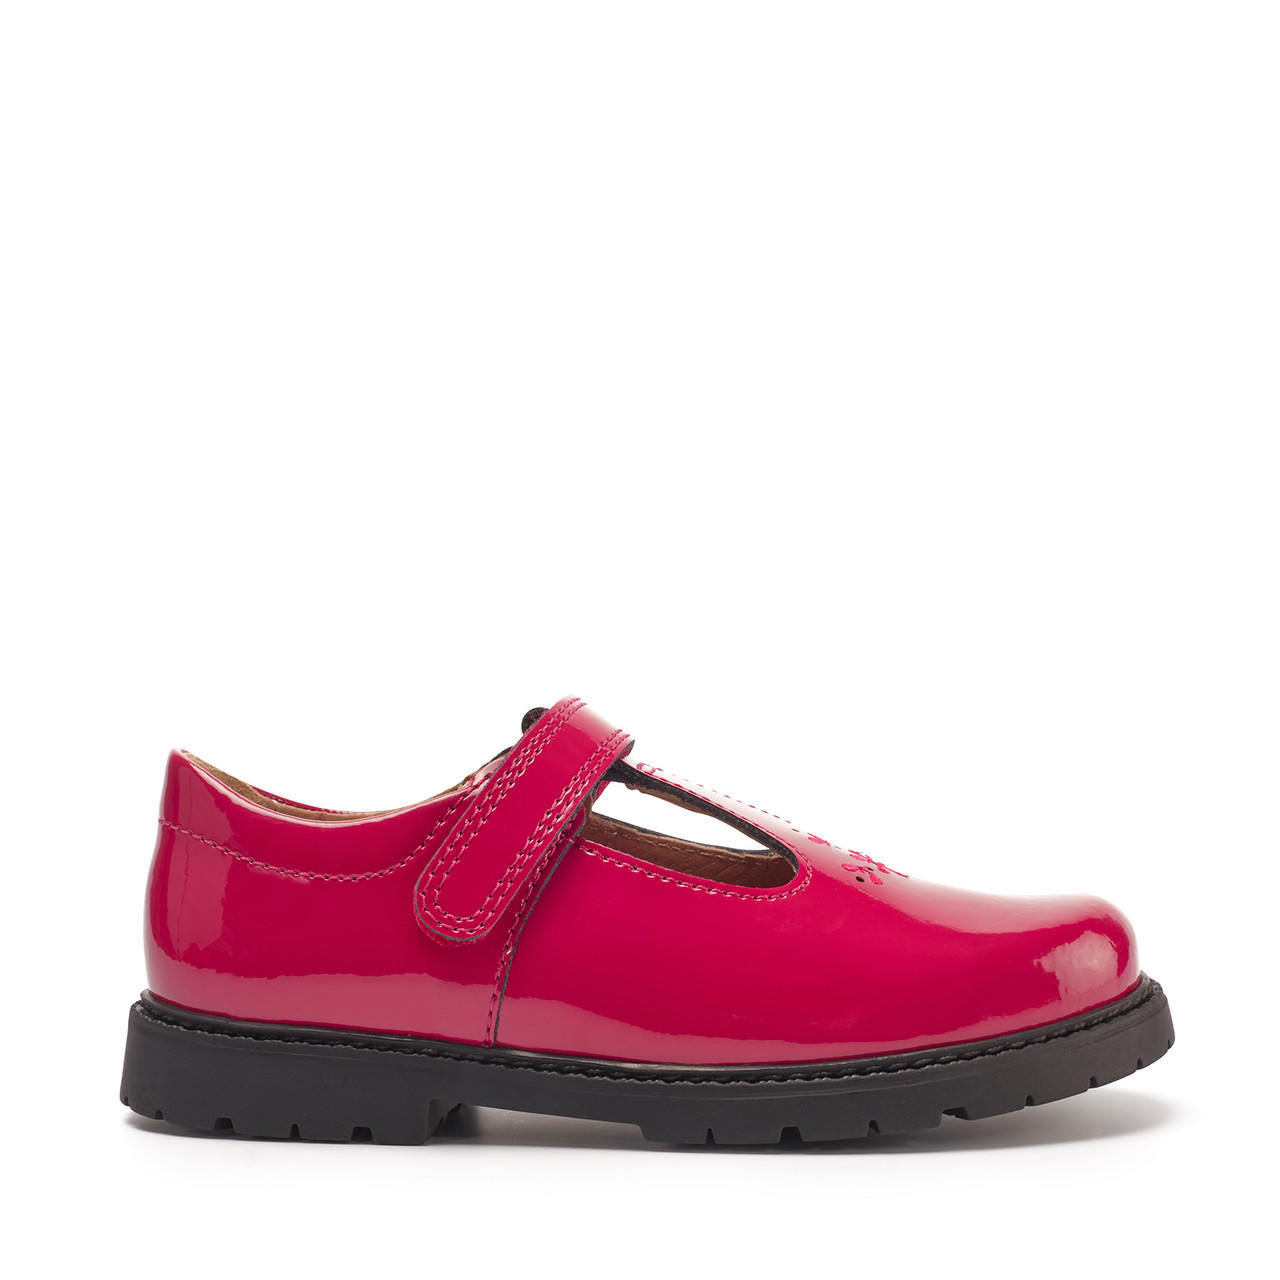 A girls T-Bar shoe by Start-Rite, style Liberty, in red patent with velcro fastening. Right side view.